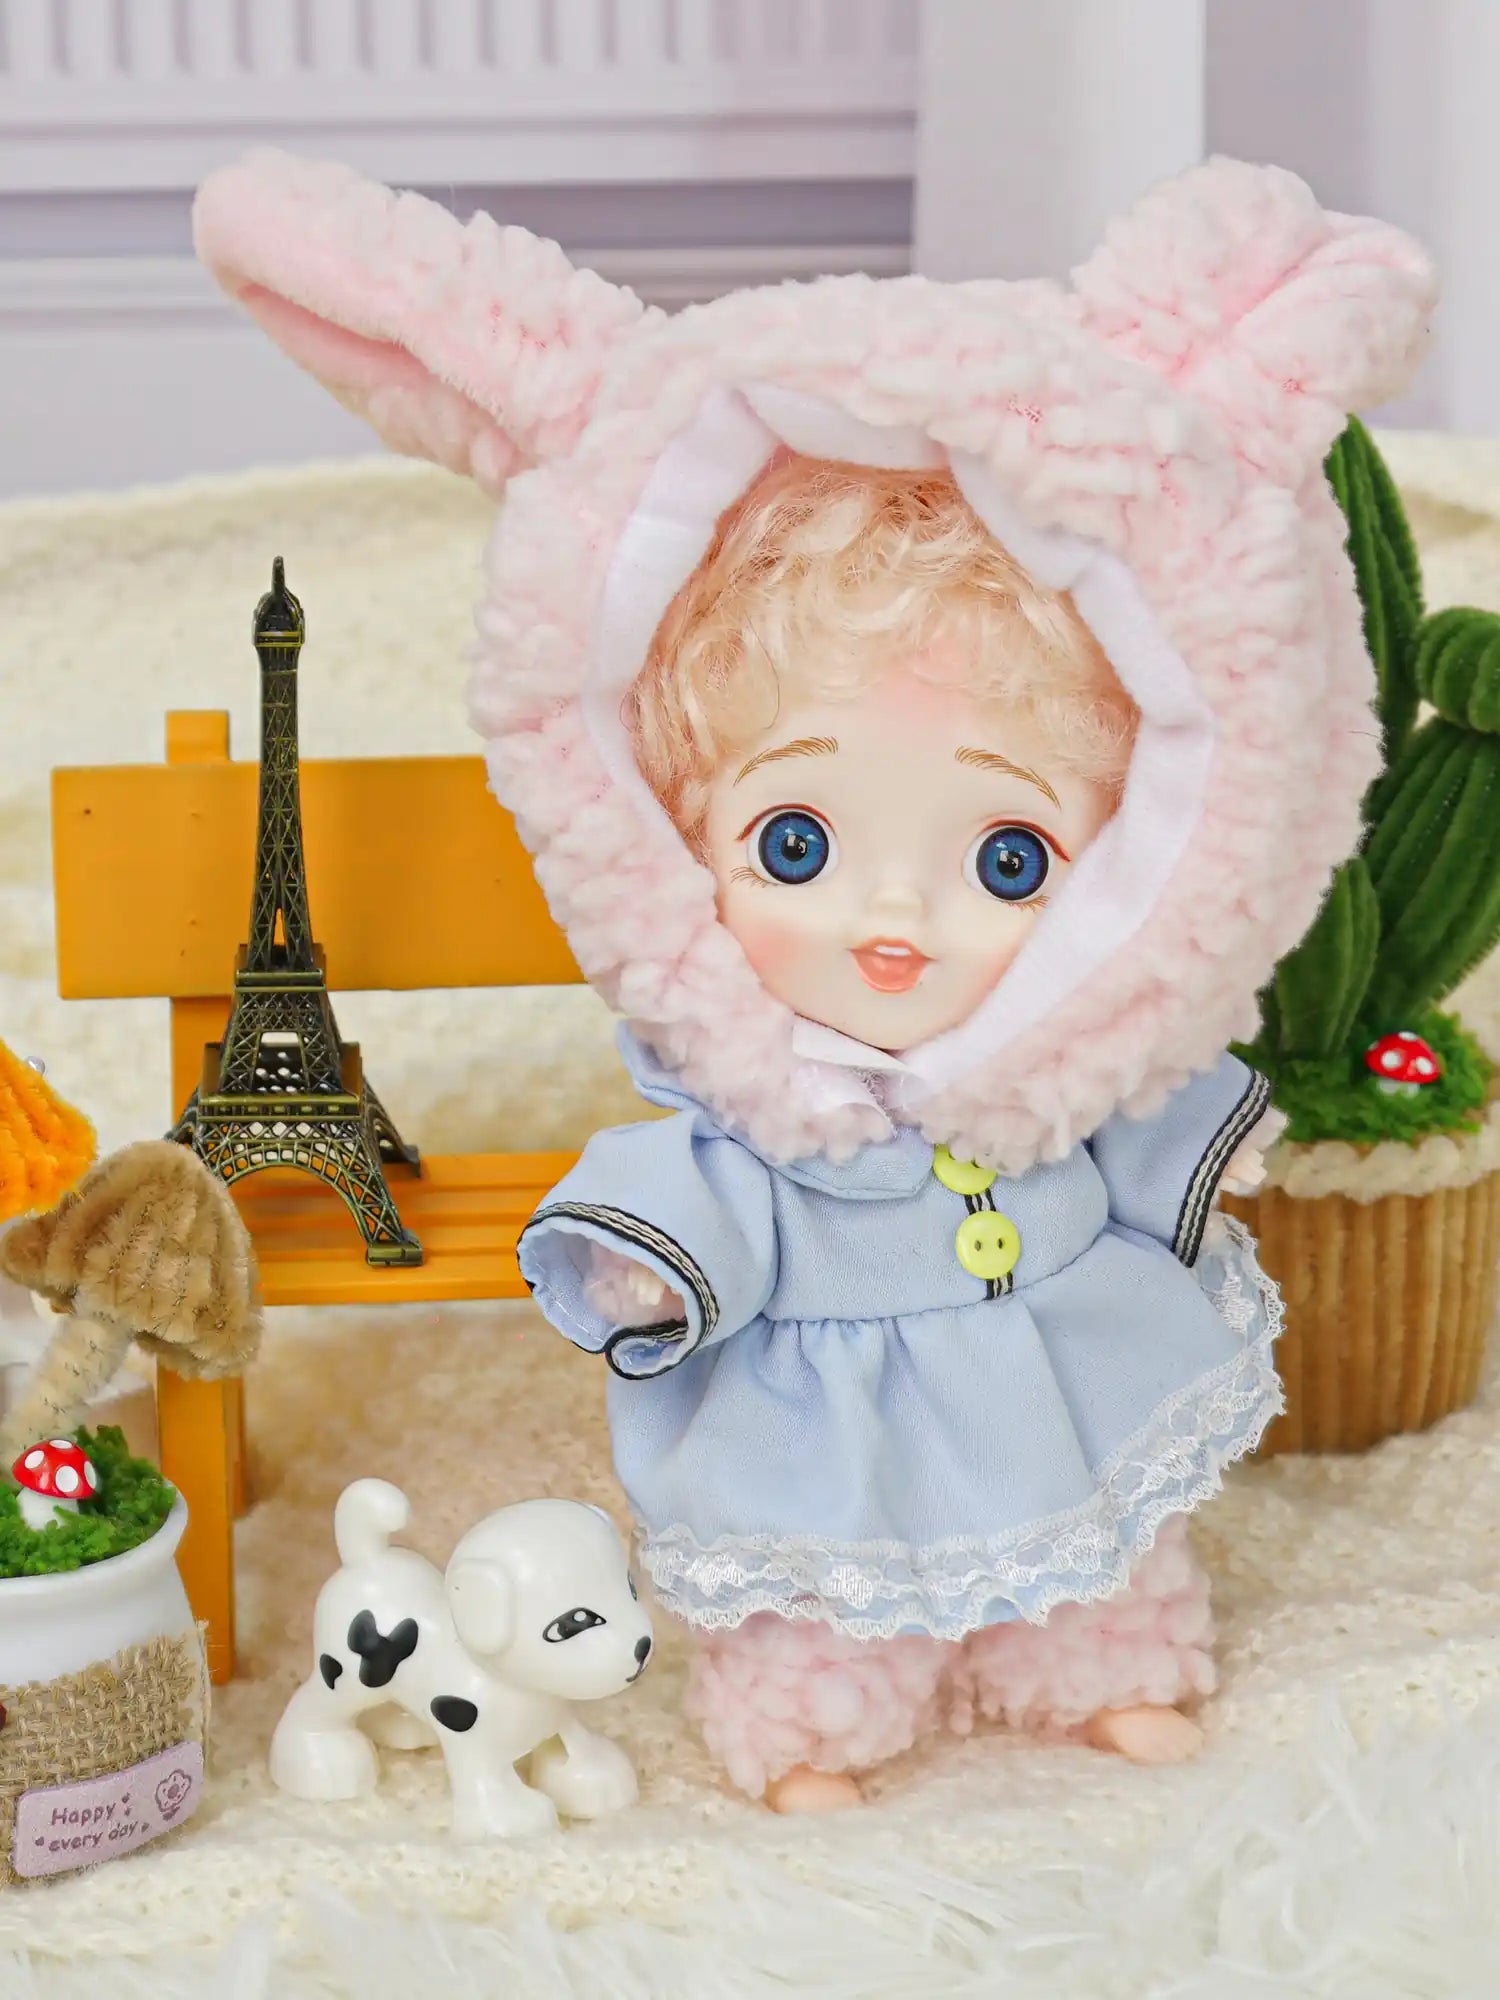 BJD with curly hair, blue eyes, bunny ears, and playful companions.